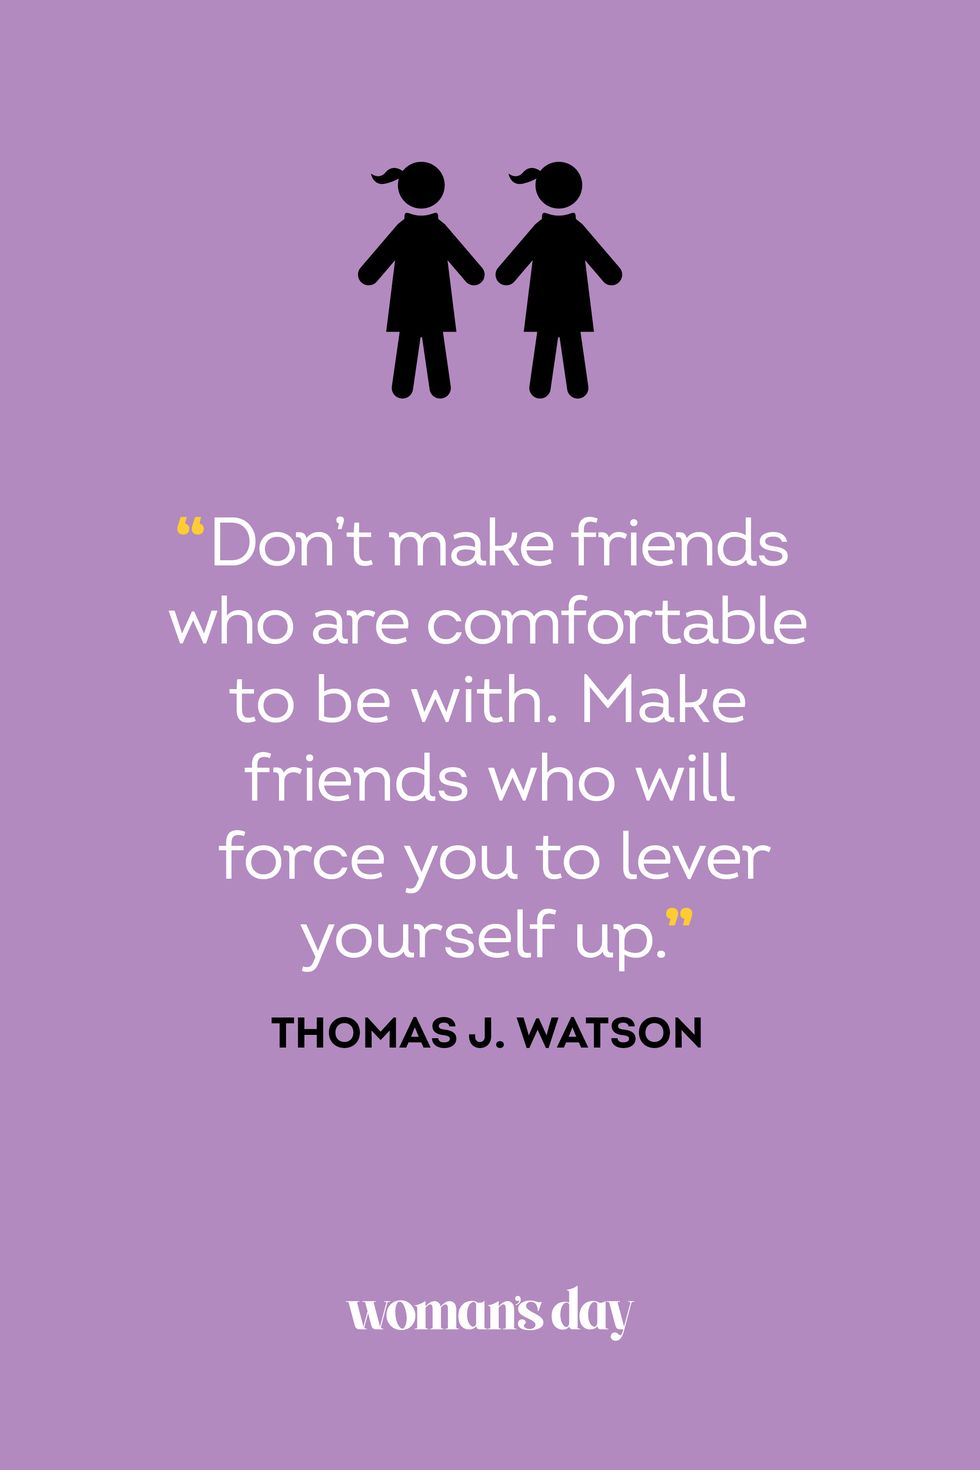 100 Short Best Friend Quotes - Friendship Quotes for Your BFF